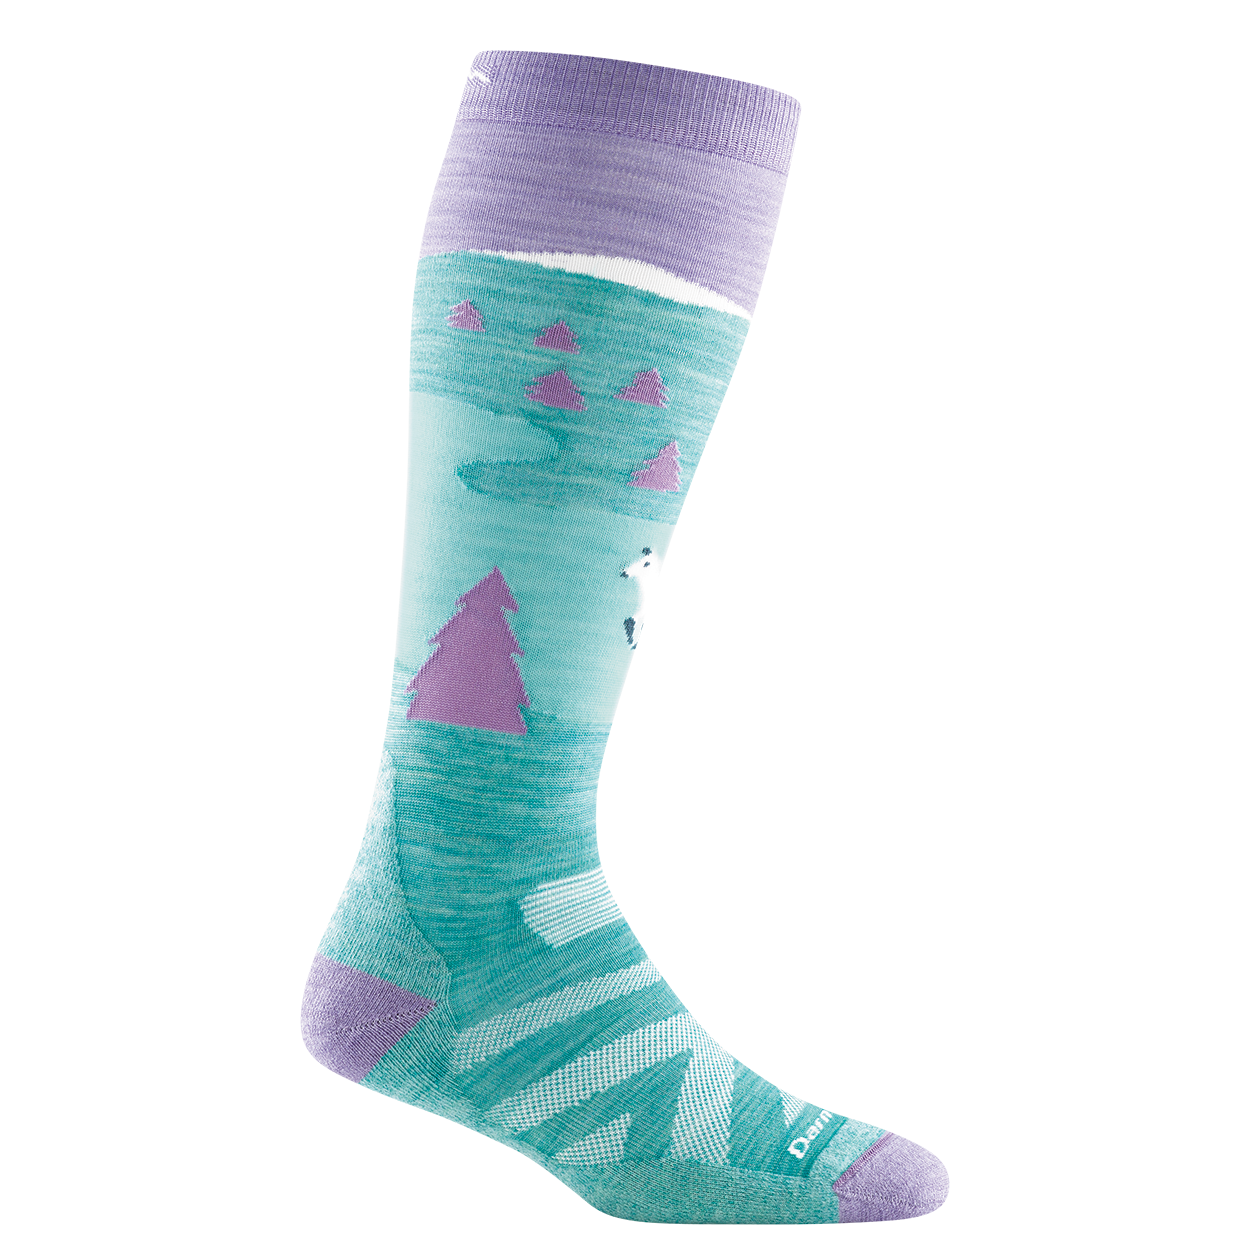 Darn Tough Youth Midweight Ski Socks - DISCONTINUED APPAREL DARN TOUGH VERMONT Small  